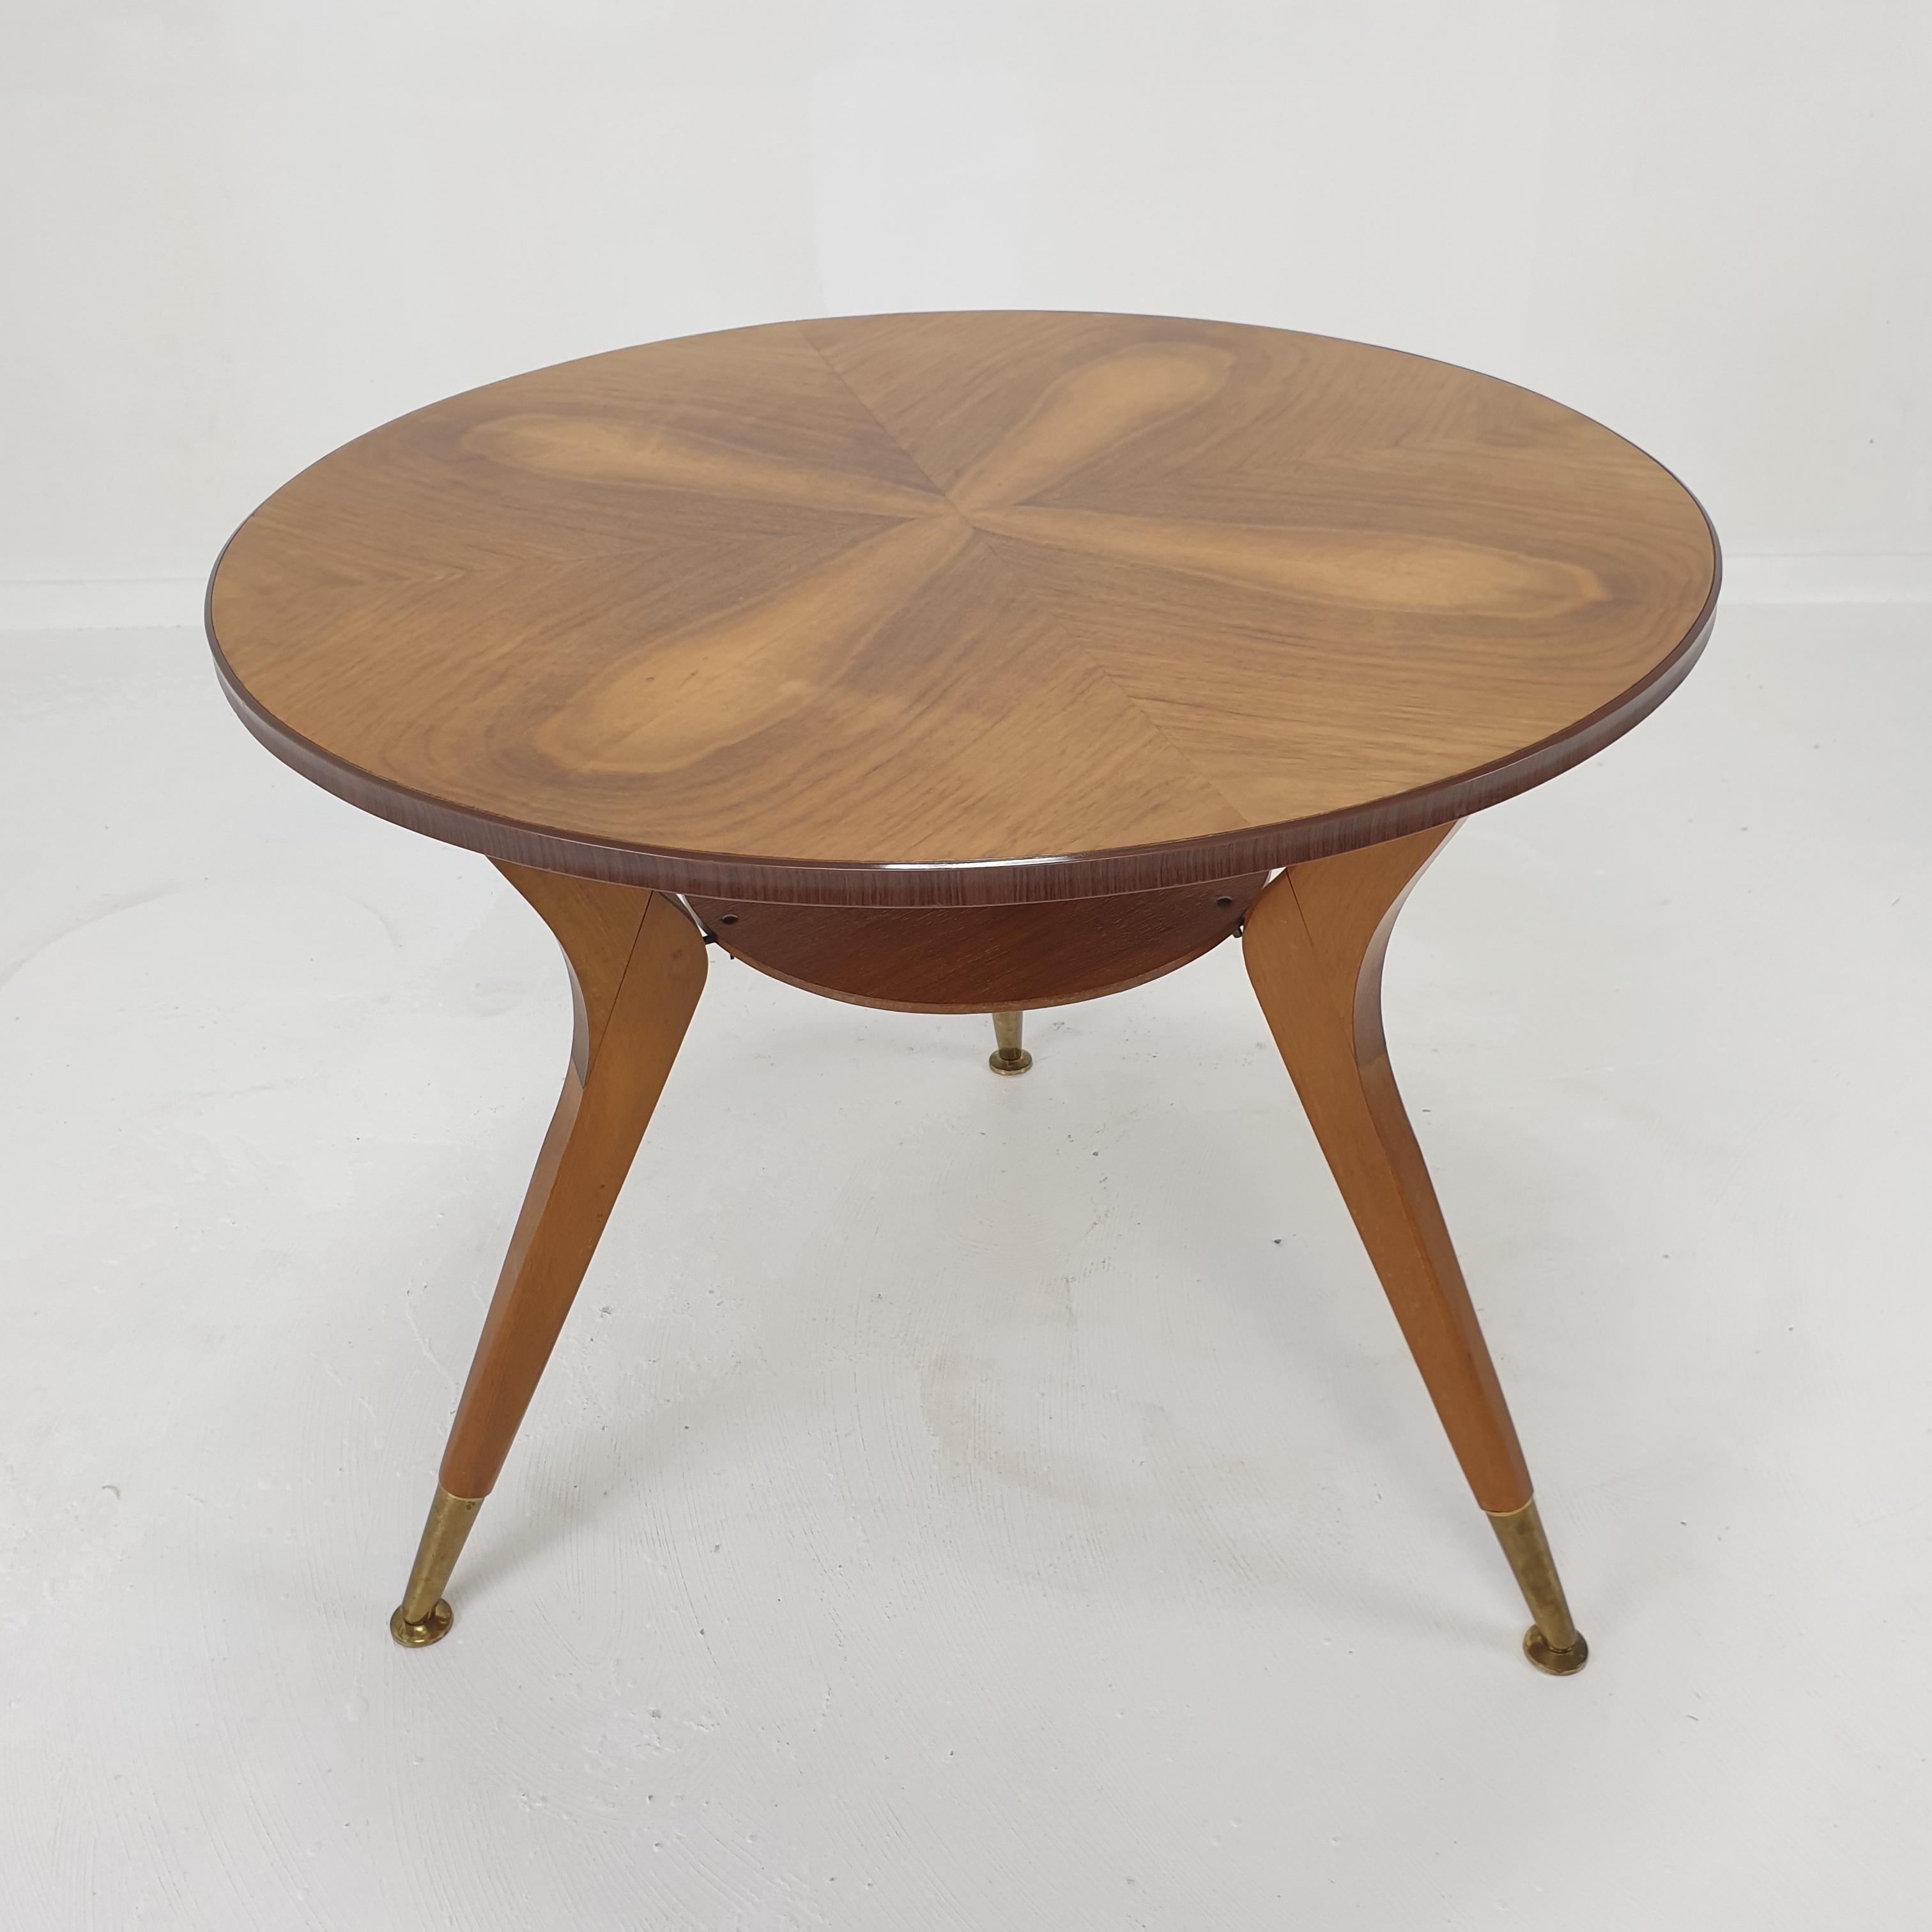 Midcentury Italian Wooden Coffee or Side Table with Brass Feet, 1960s For Sale 3